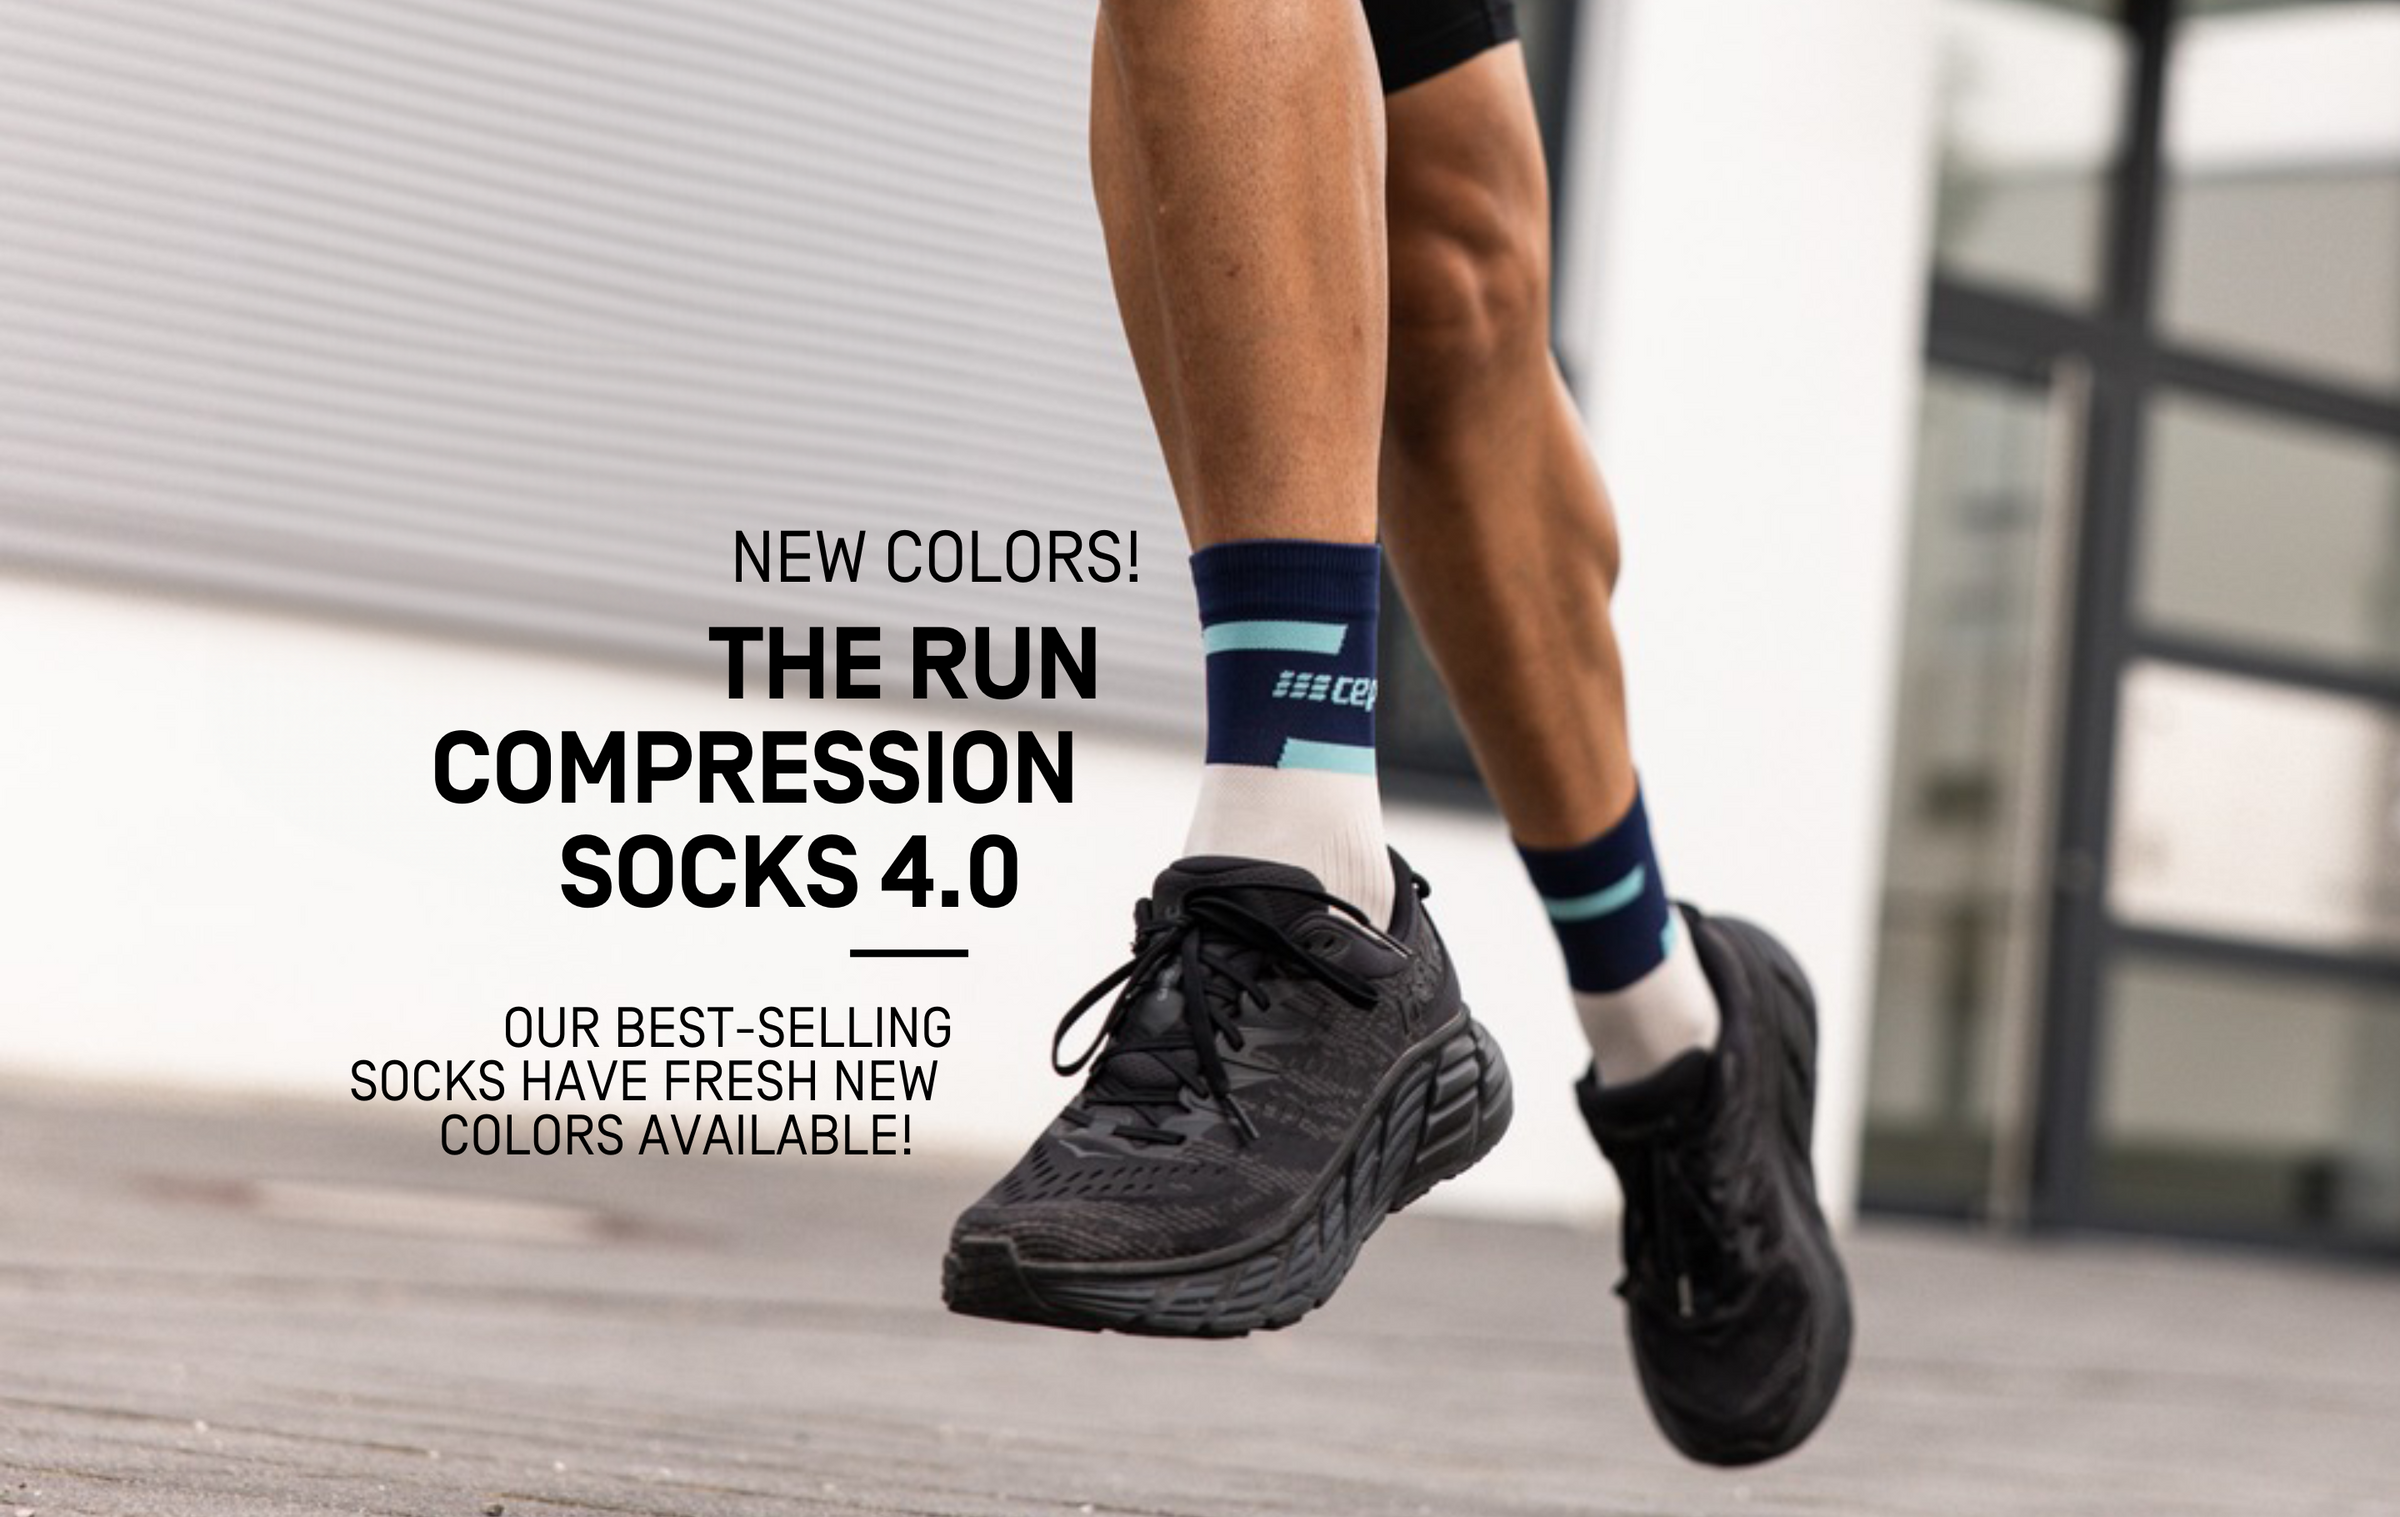 Track Shack - What is CEP Compression Wear?